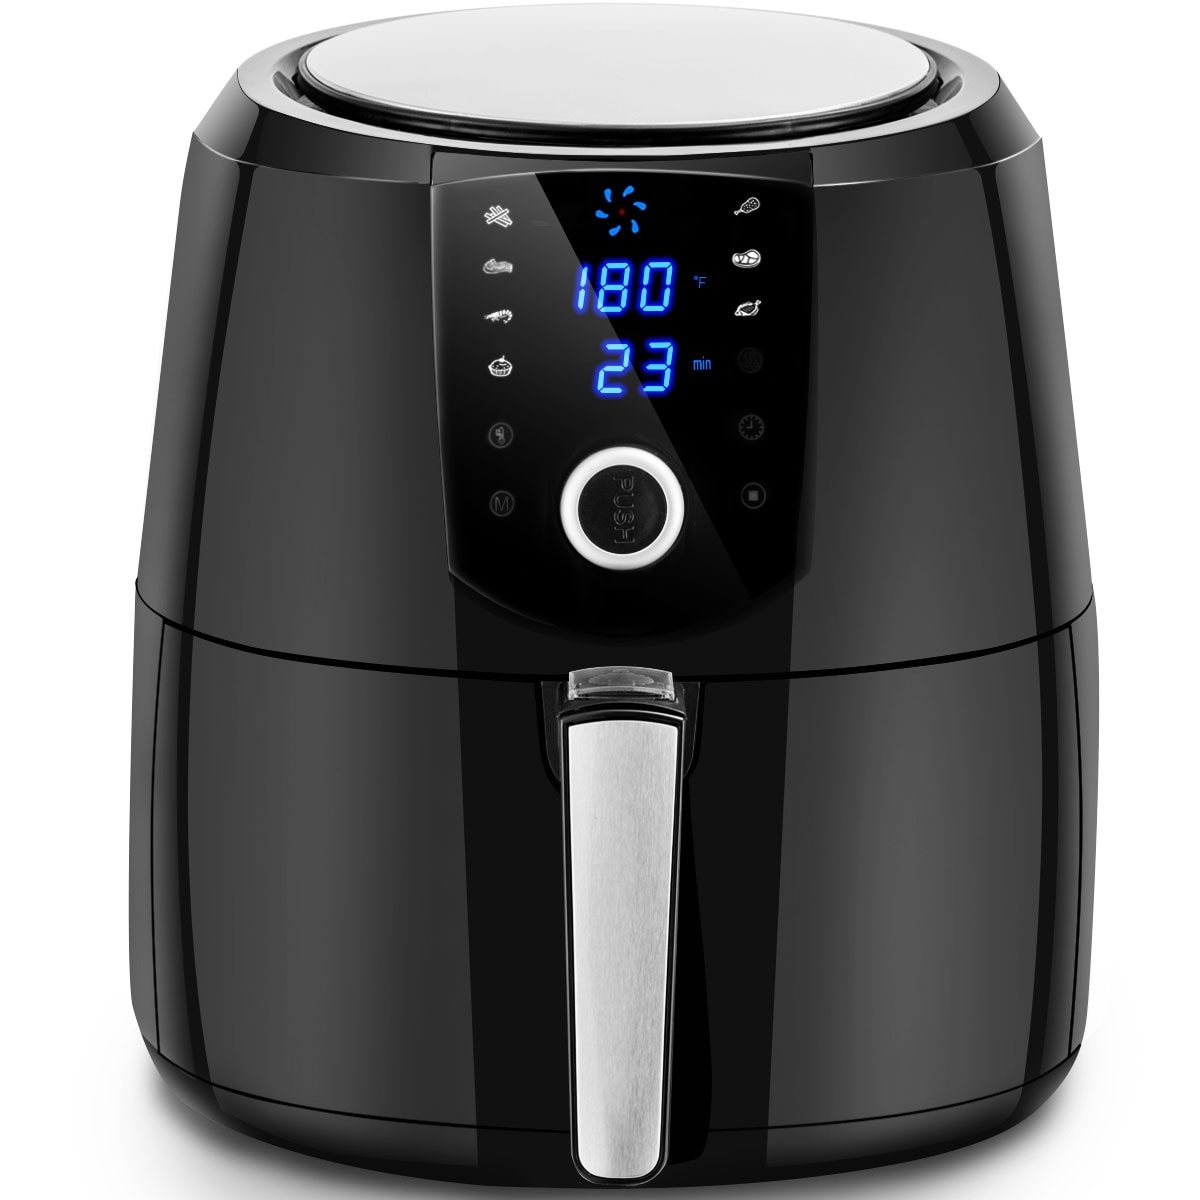 Cosmo COS-58AFAKSS 5.5 Liter Electric Hot Air Fryer with Temperature Control, Timer, Non-Stick Frying Tray, 1400W (5.8 Quarts, Stainless Steel /